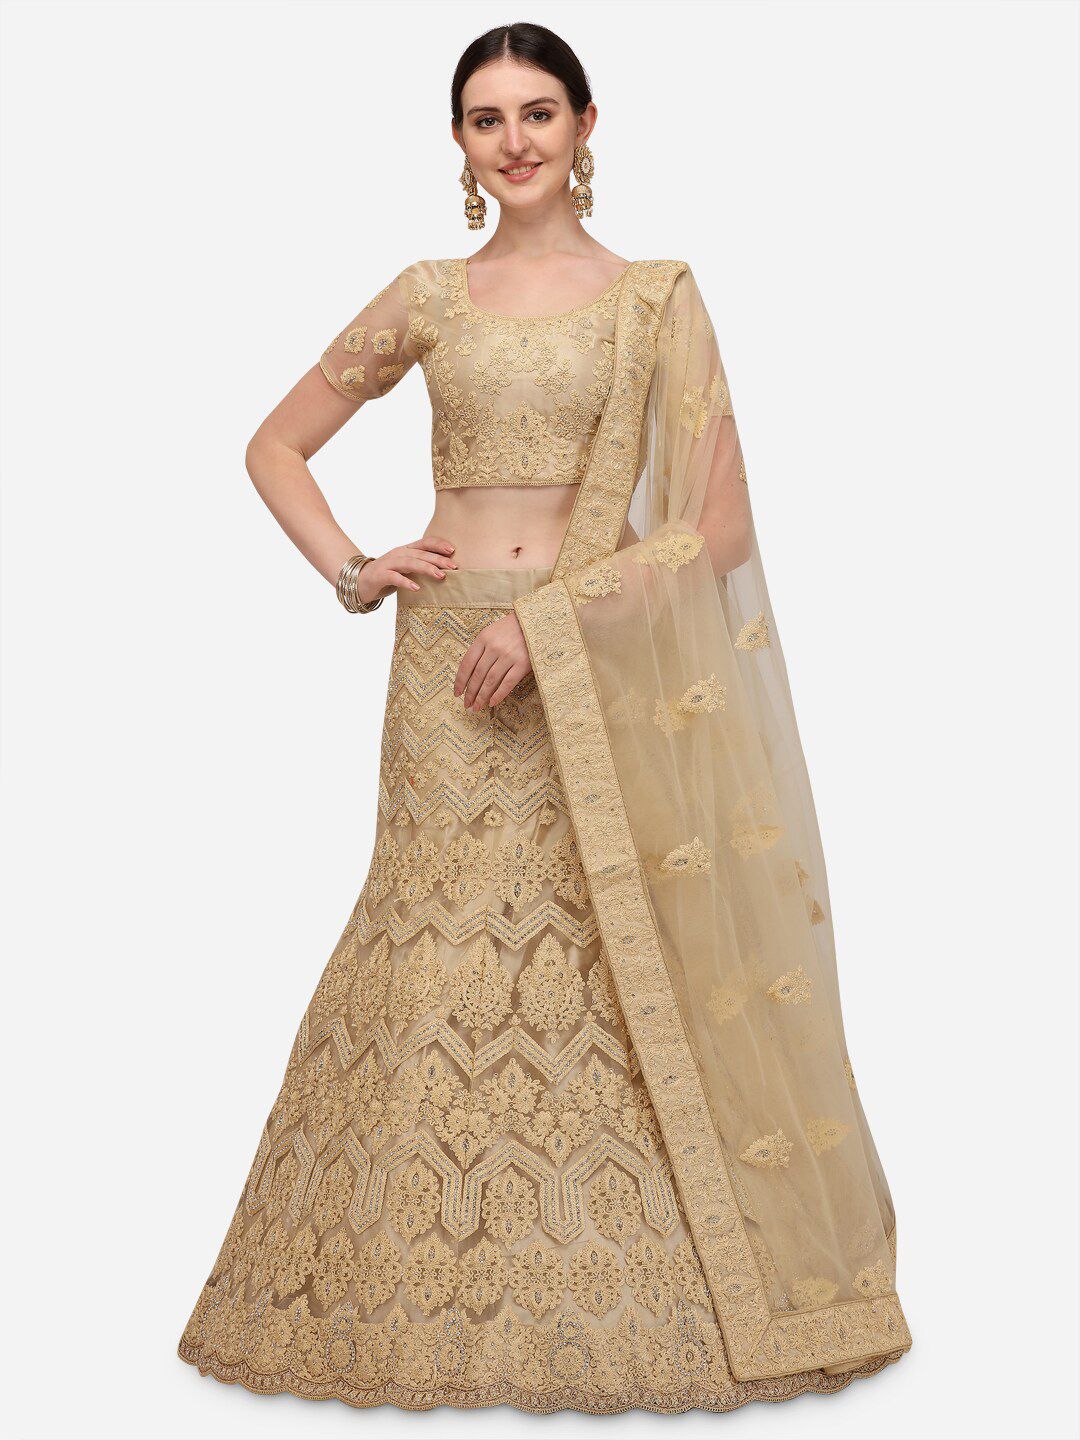 Mameraa Beige Embroidered Beads and Stones Semi-Stitched Lehenga & Unstitched Blouse With Dupatta Price in India